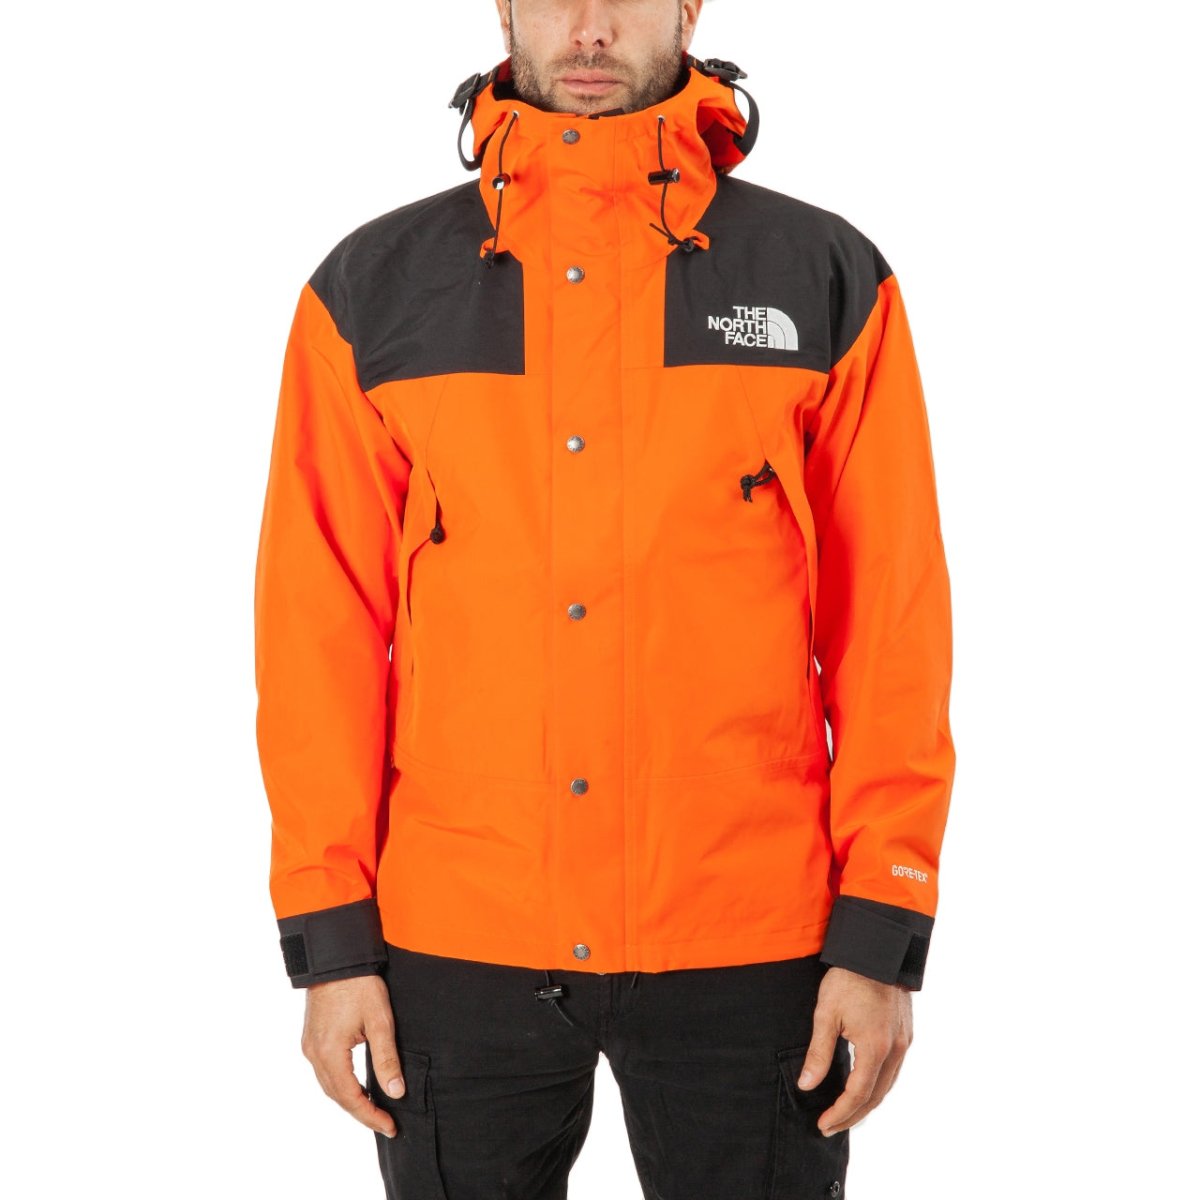 priority taxi it can THE NORTH FACE 1990 Mountain Jacket GTX mehriran.tv